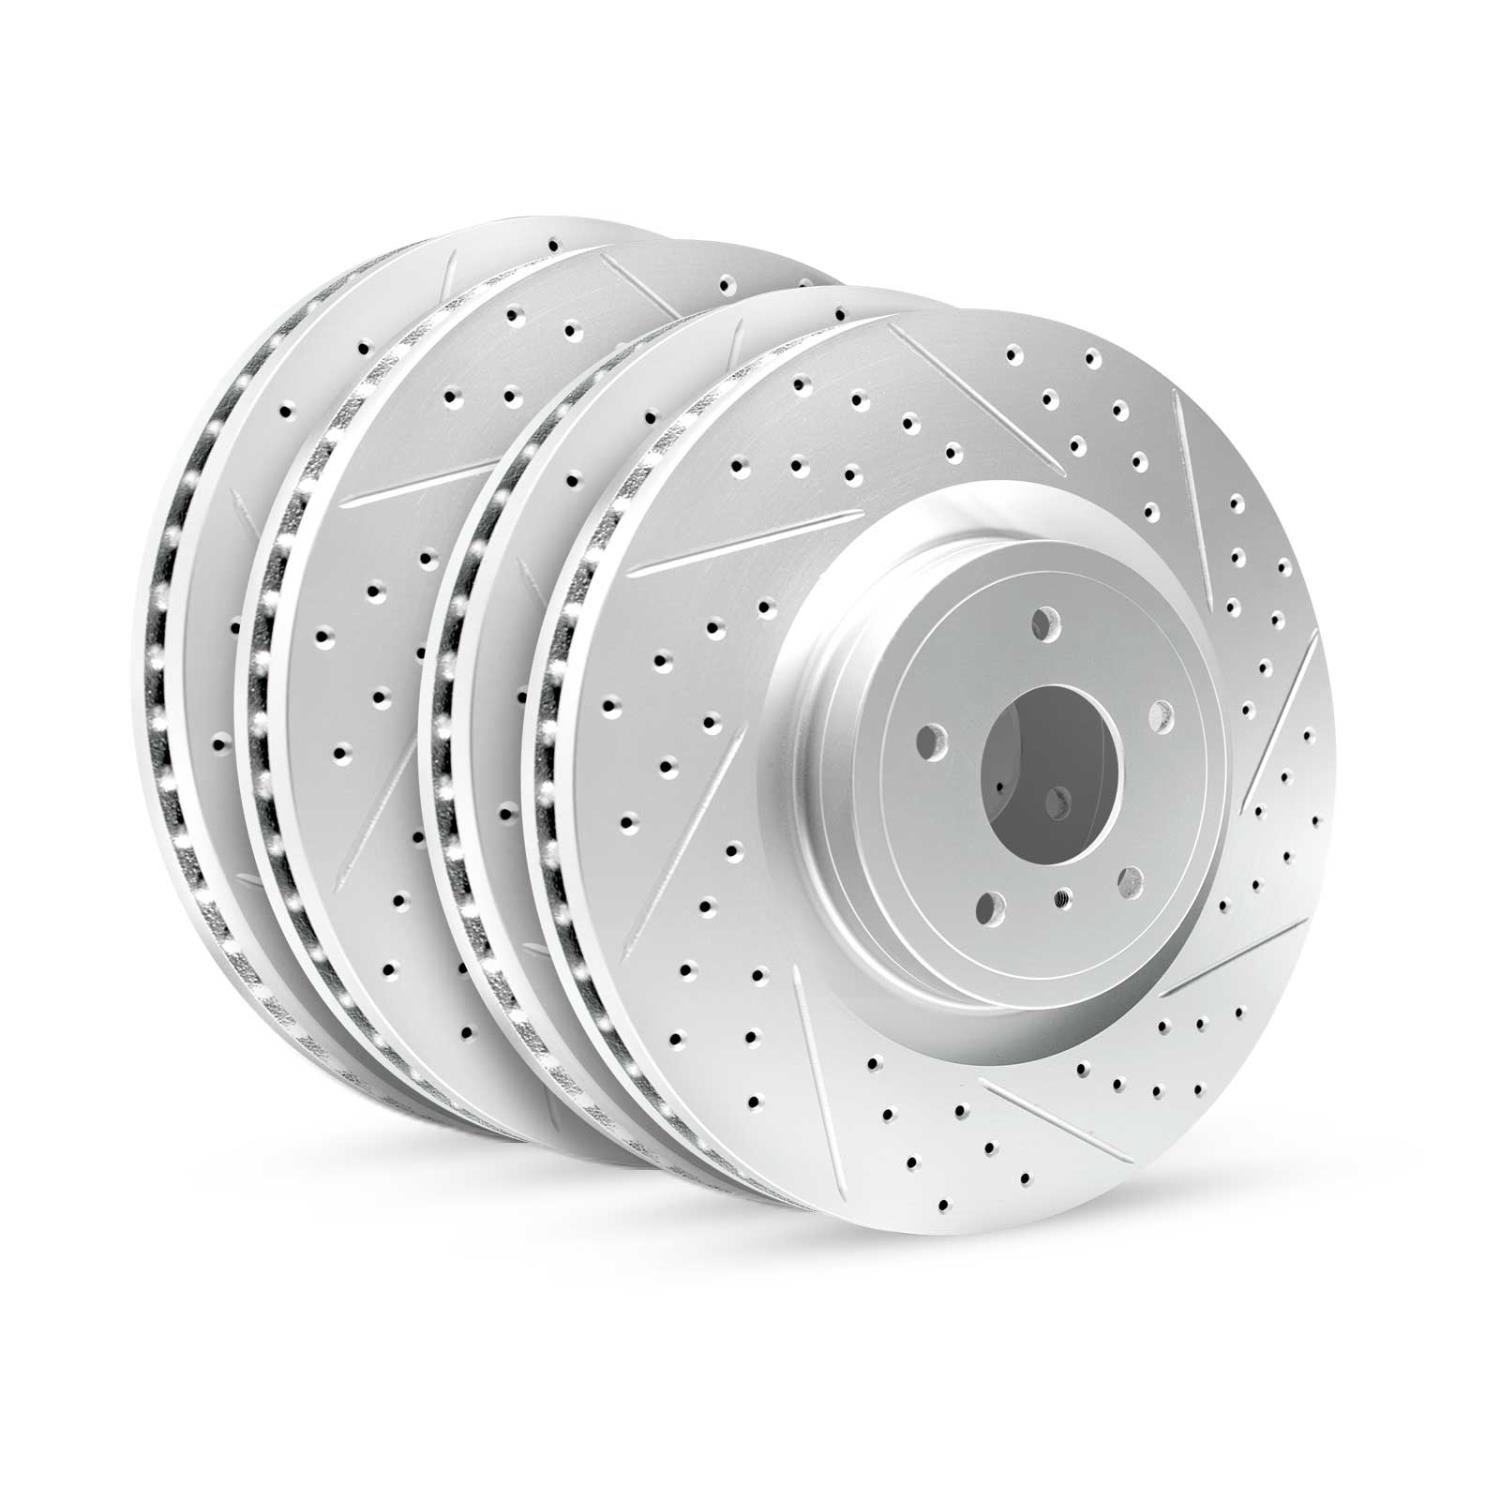 GEO-Carbon Drilled/Slotted Rotors, Fits Select Land Rover,